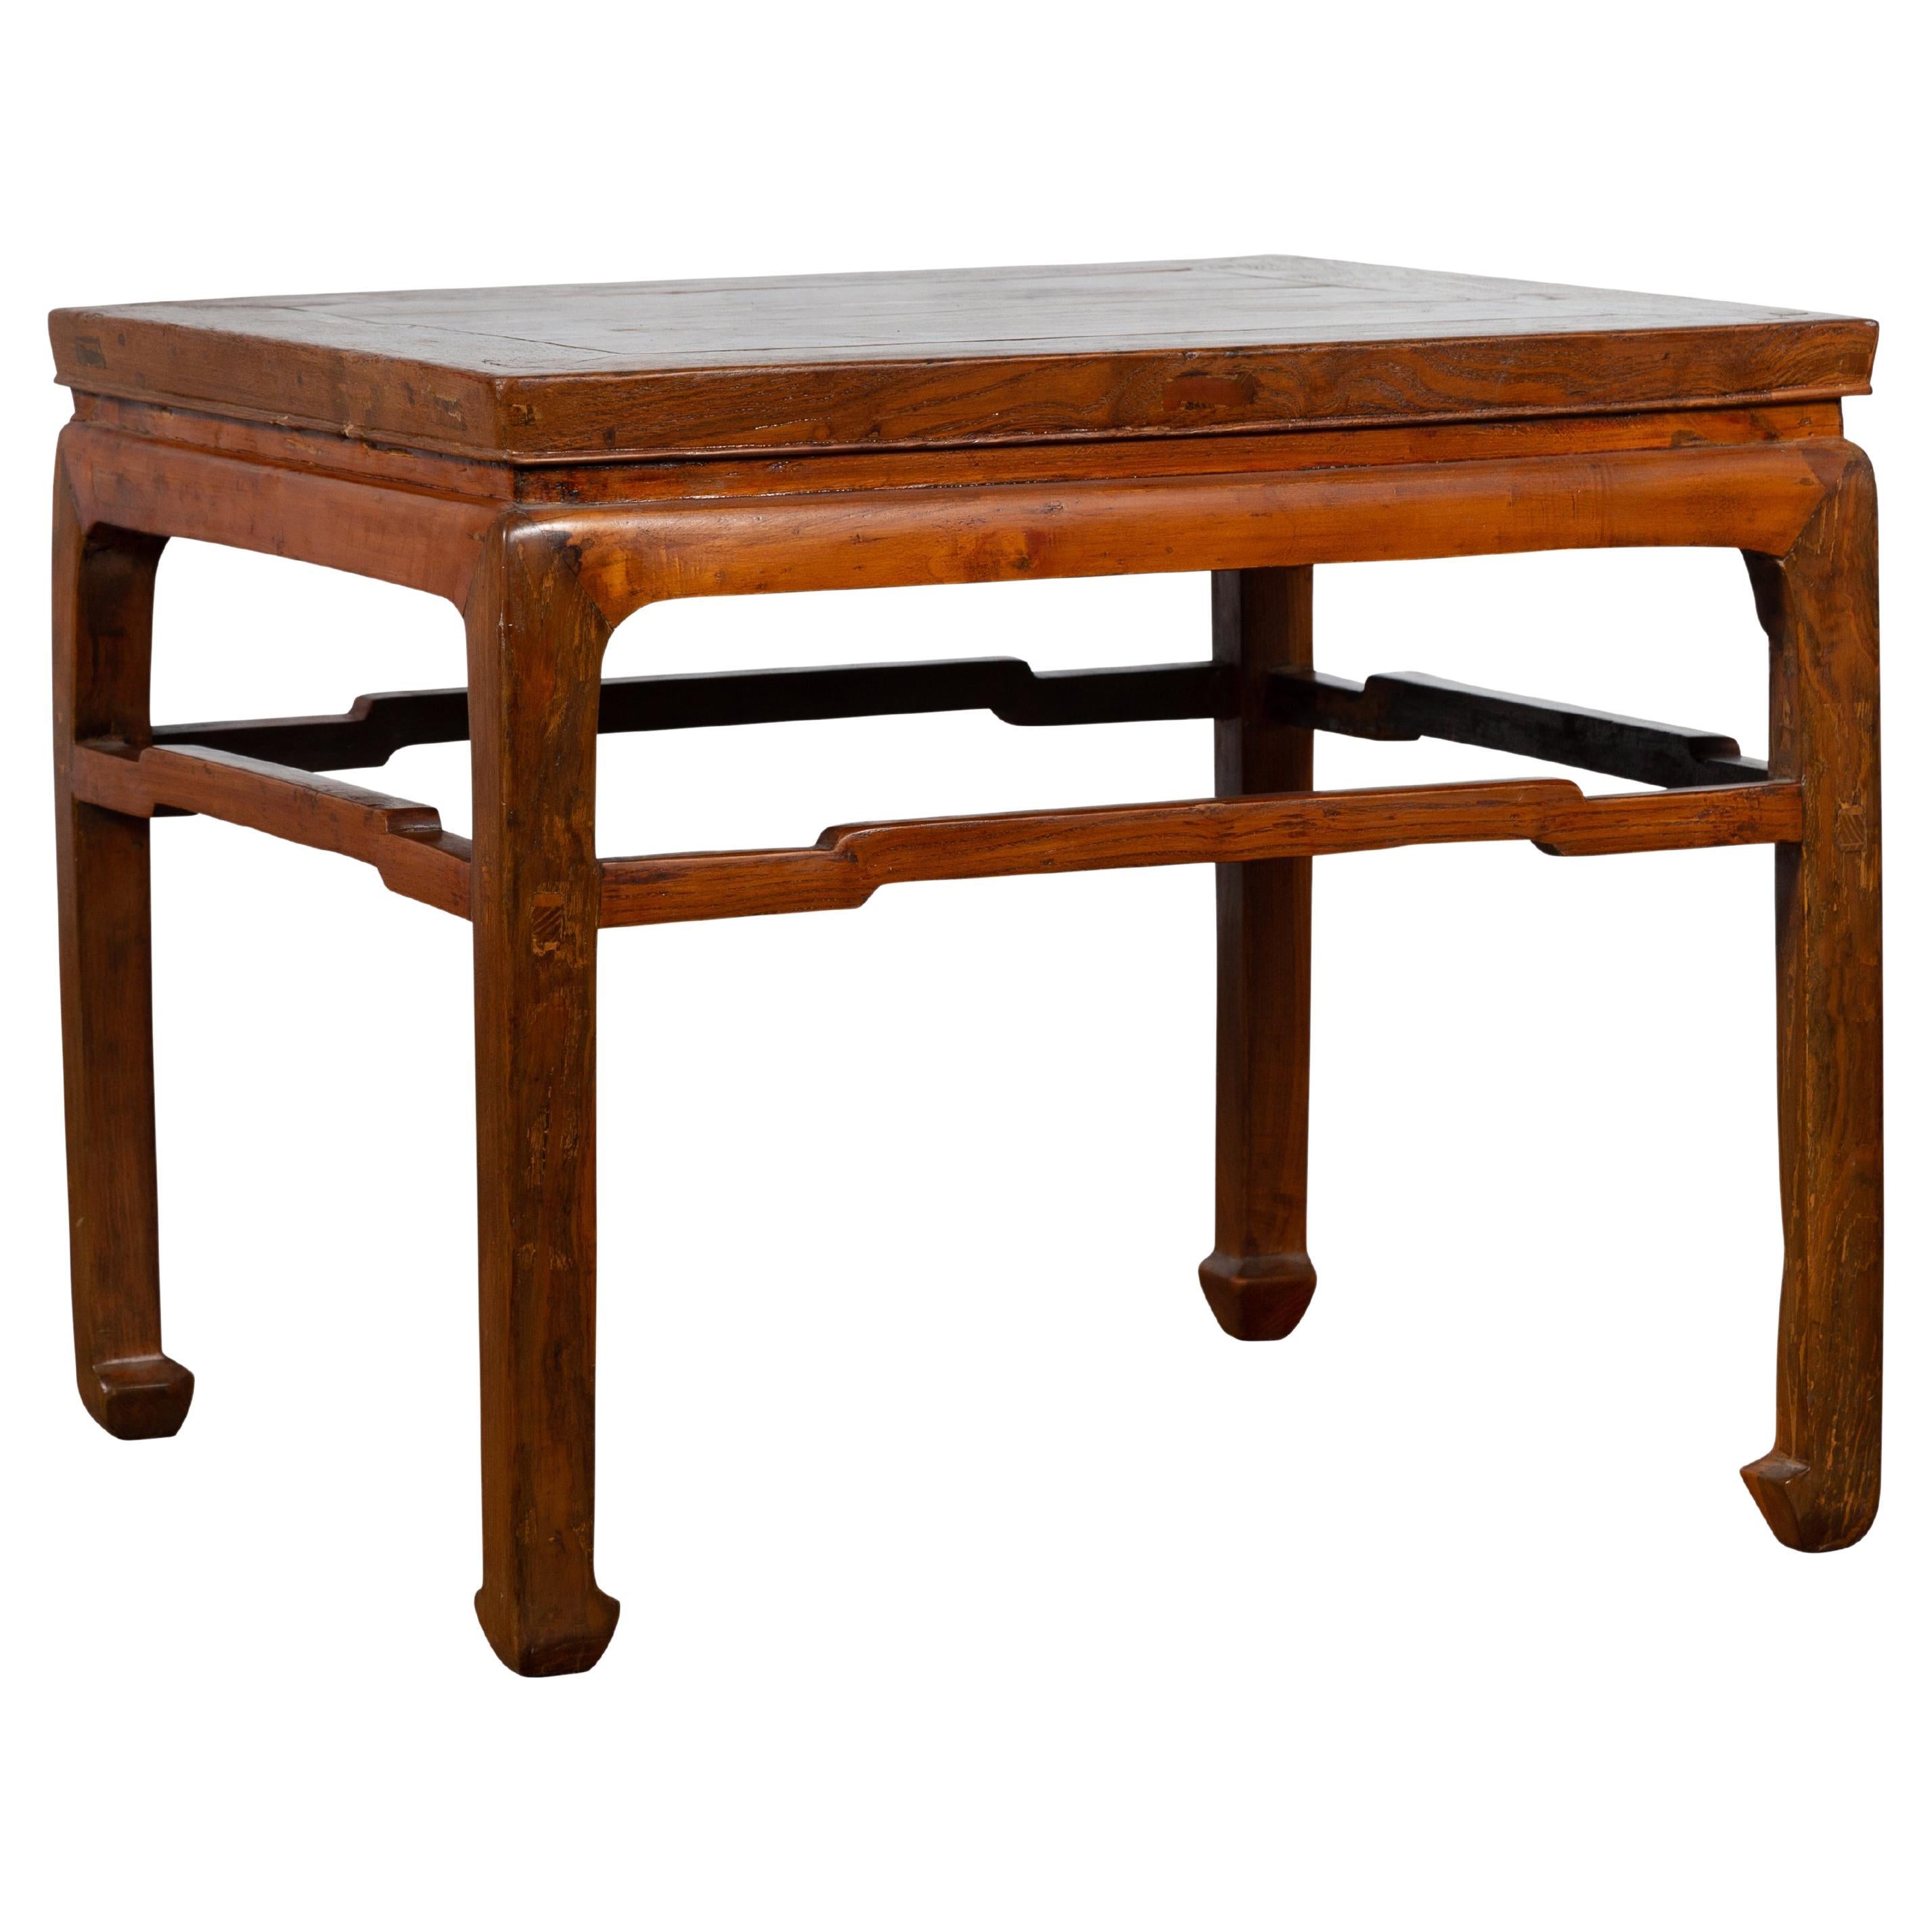 Chinese Ming Dynasty Style Early 20th Century Table with Humpback Stretcher